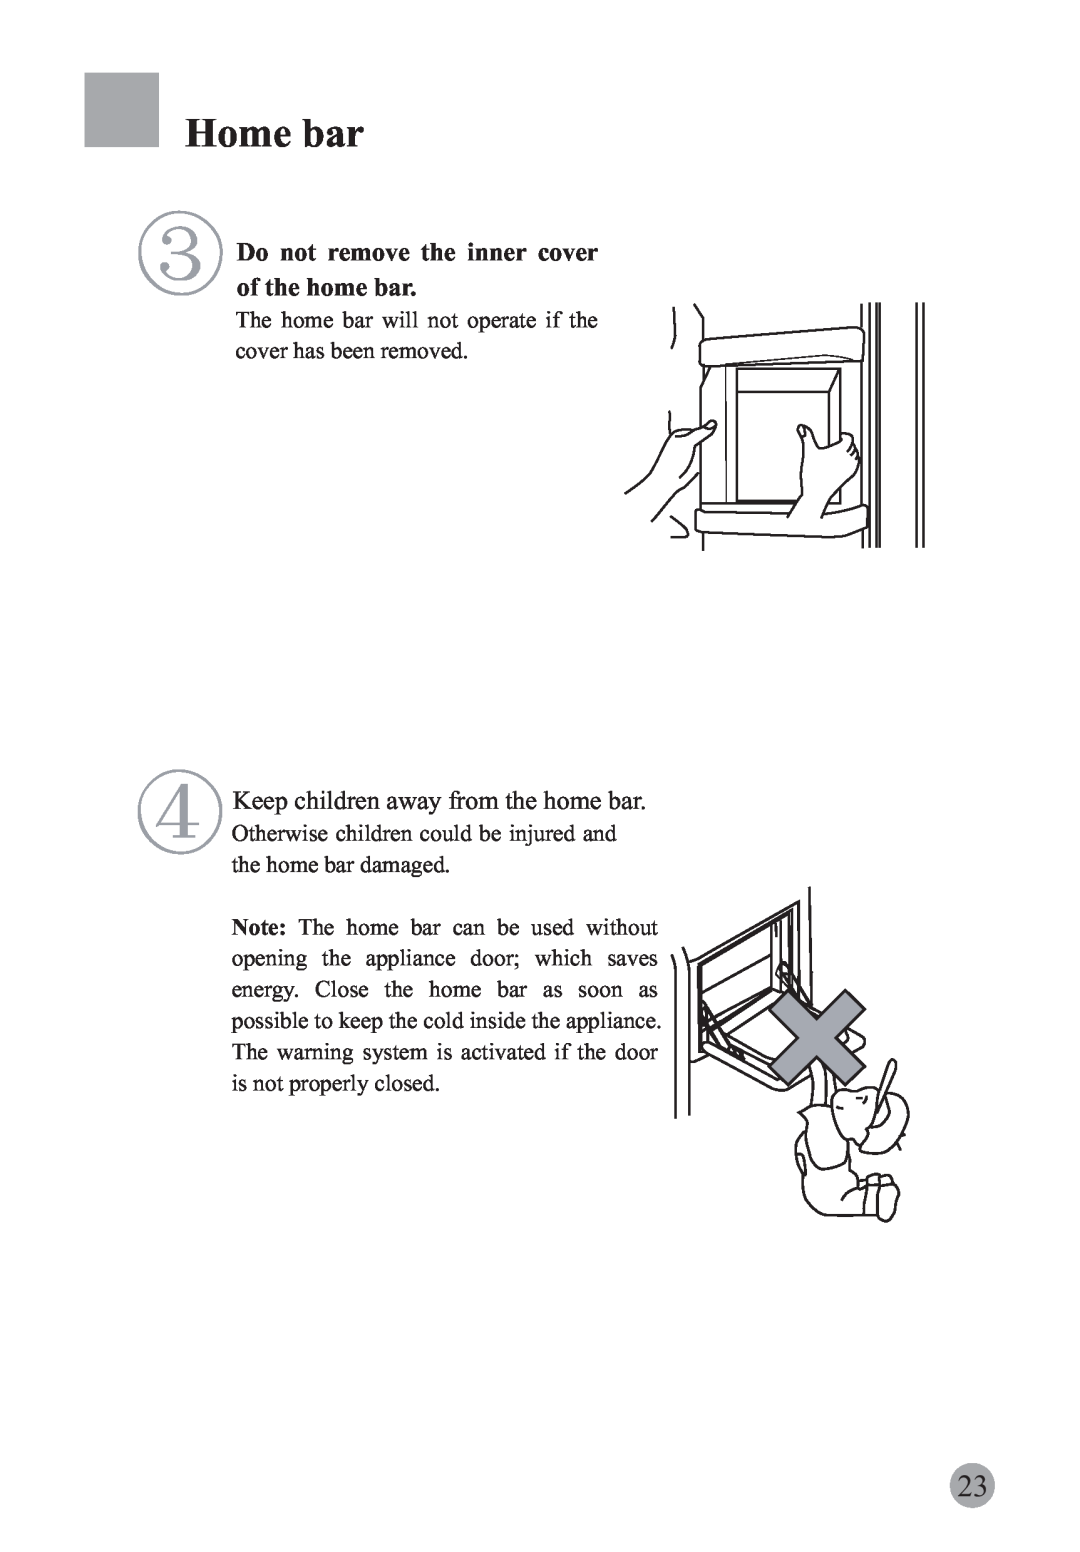 Haier HRF-663ASA2* manual Do not remove the inner cover of the home bar, Home bar, Keep children away from the home bar 